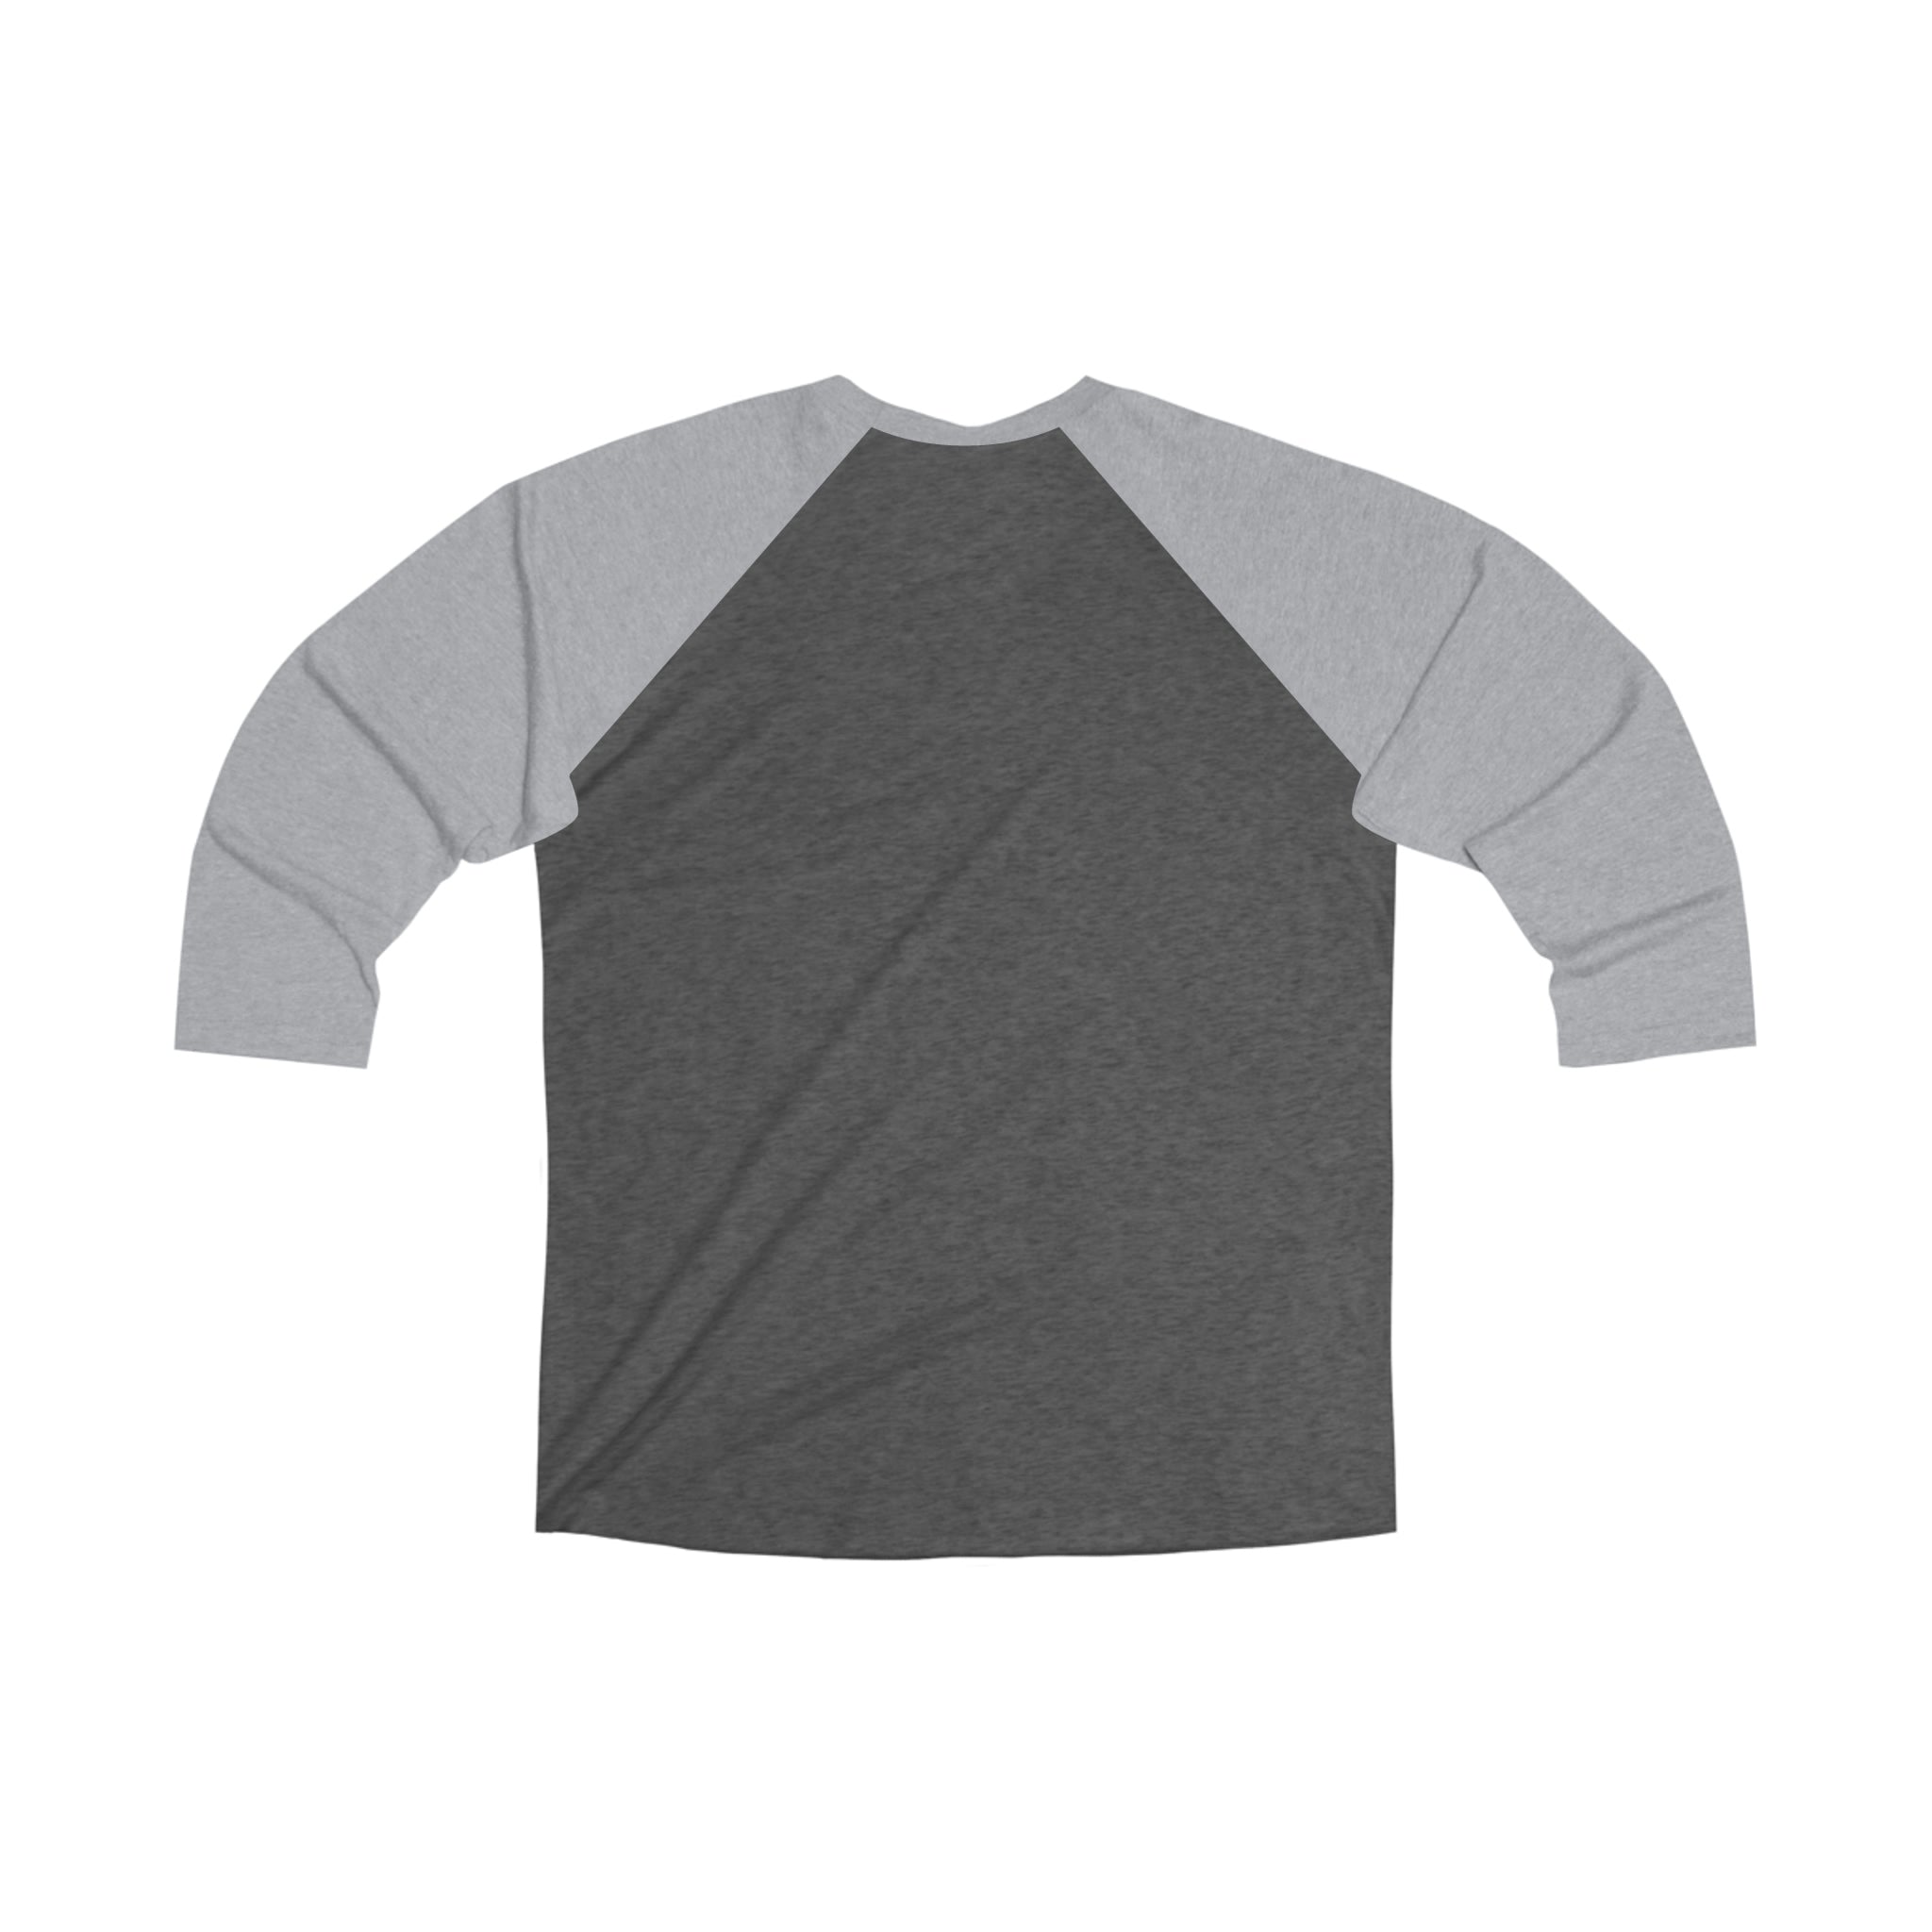 Anacotte Unisex Tri-Blend 3/4 Raglan Tee Stay Stylish and Comfortable